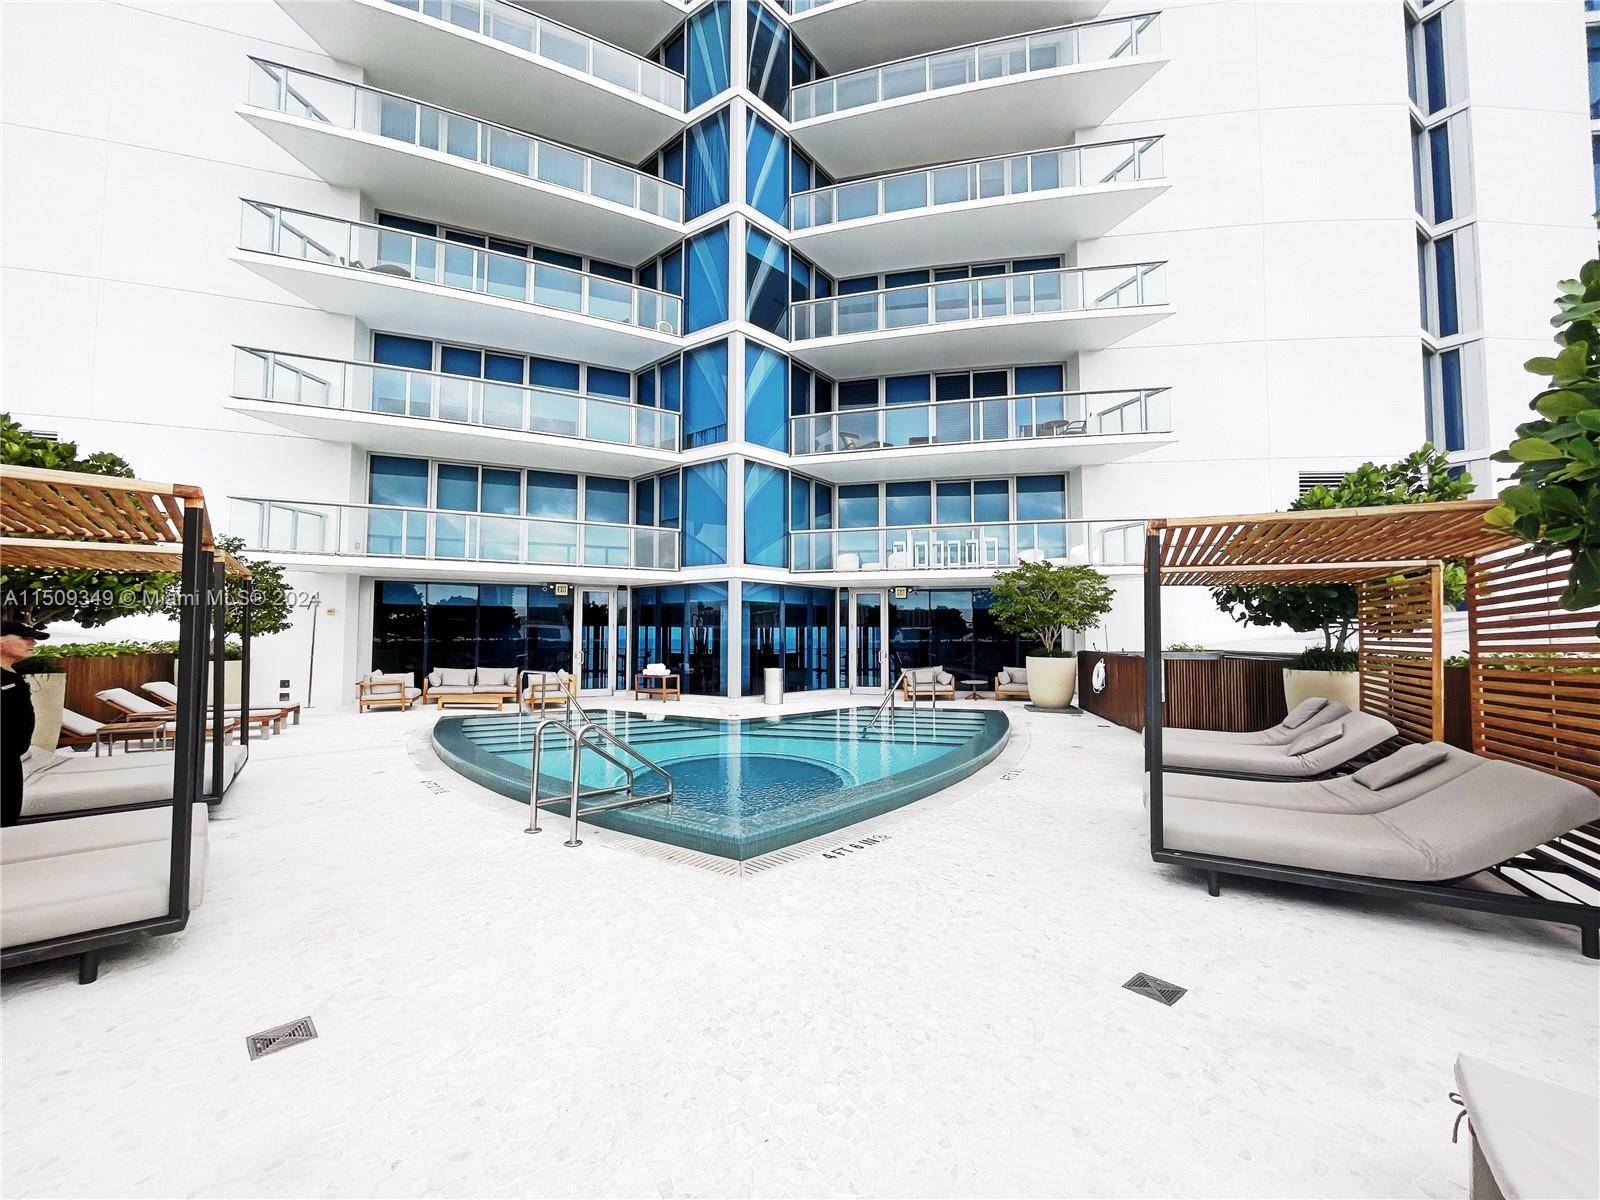 JADE BEACH iconic building designed by world famous CARLOS OTT combining the feeling of a private house with the luxurious lifestyle of a High end Highrise, 4 BED, 4.